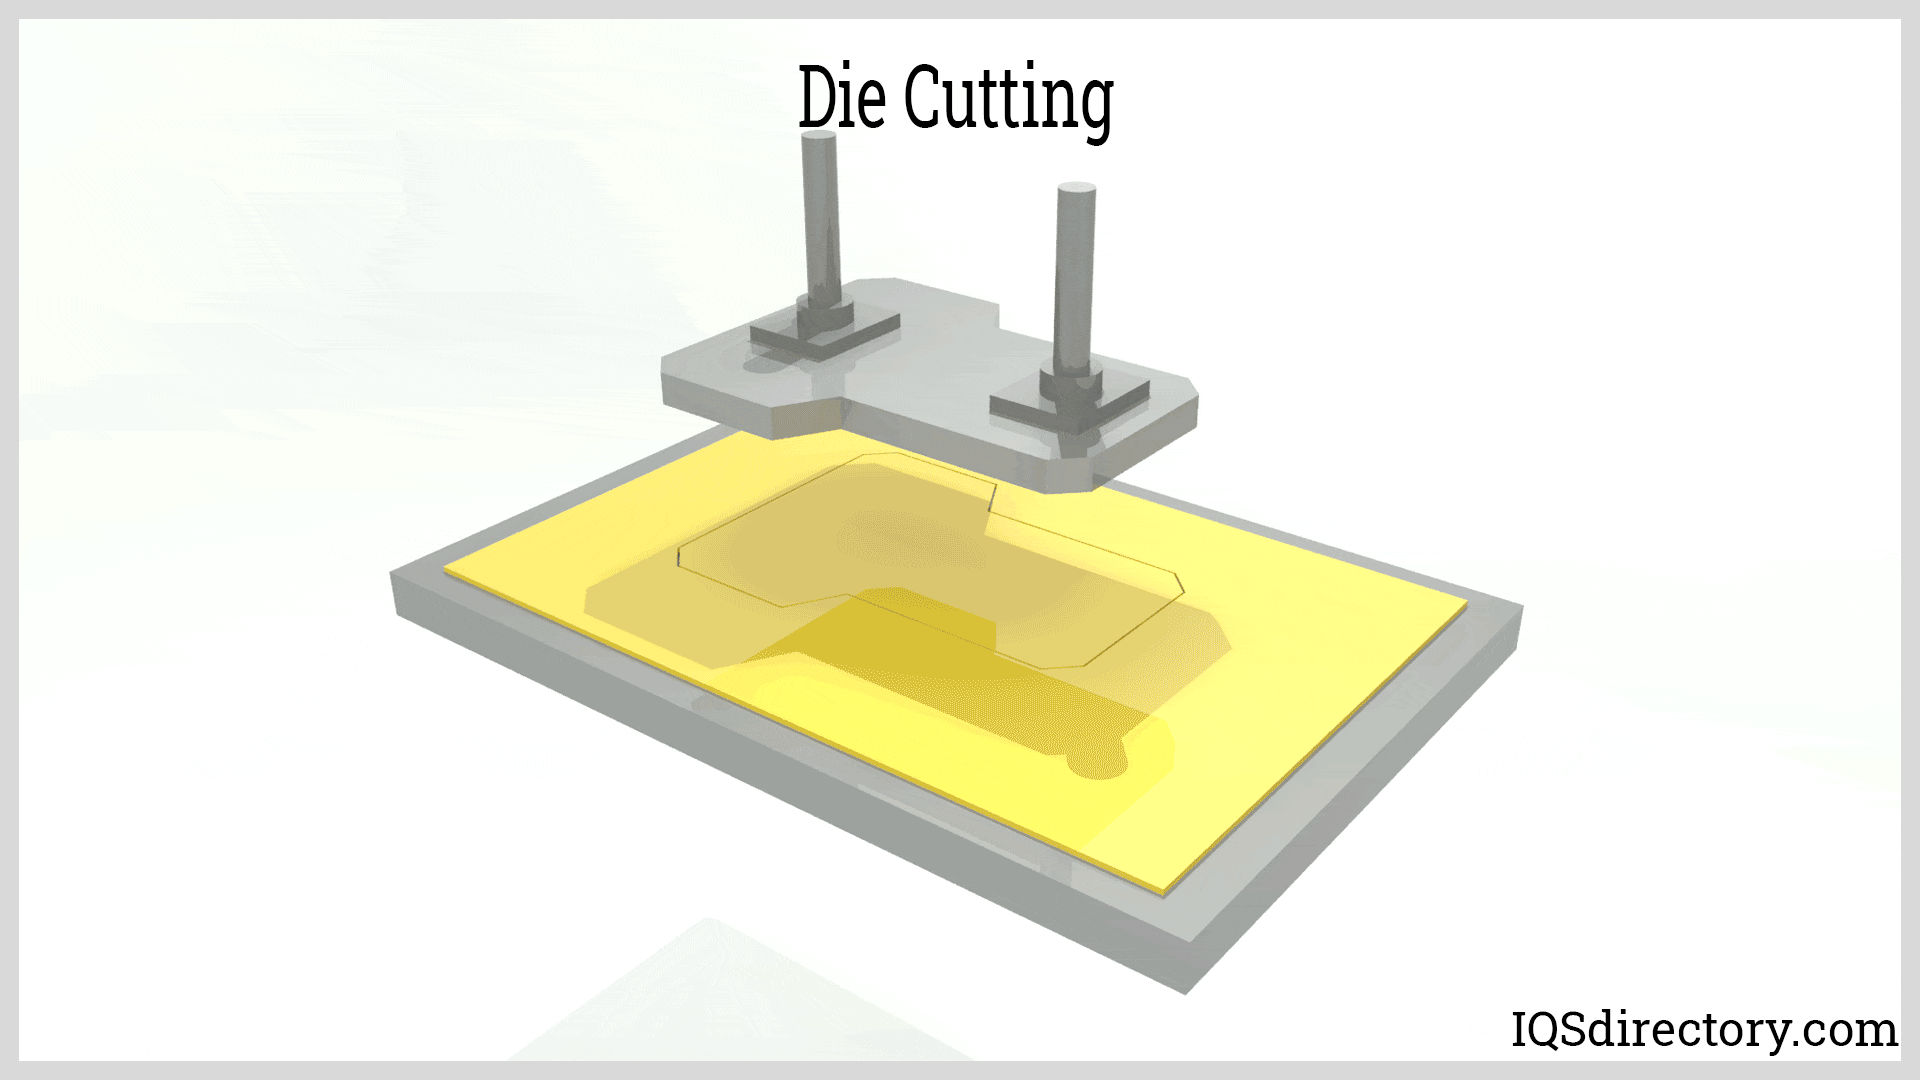 Multi-functional Manual Die cutting press and cutting board (paper cutting  press, paper cutter)